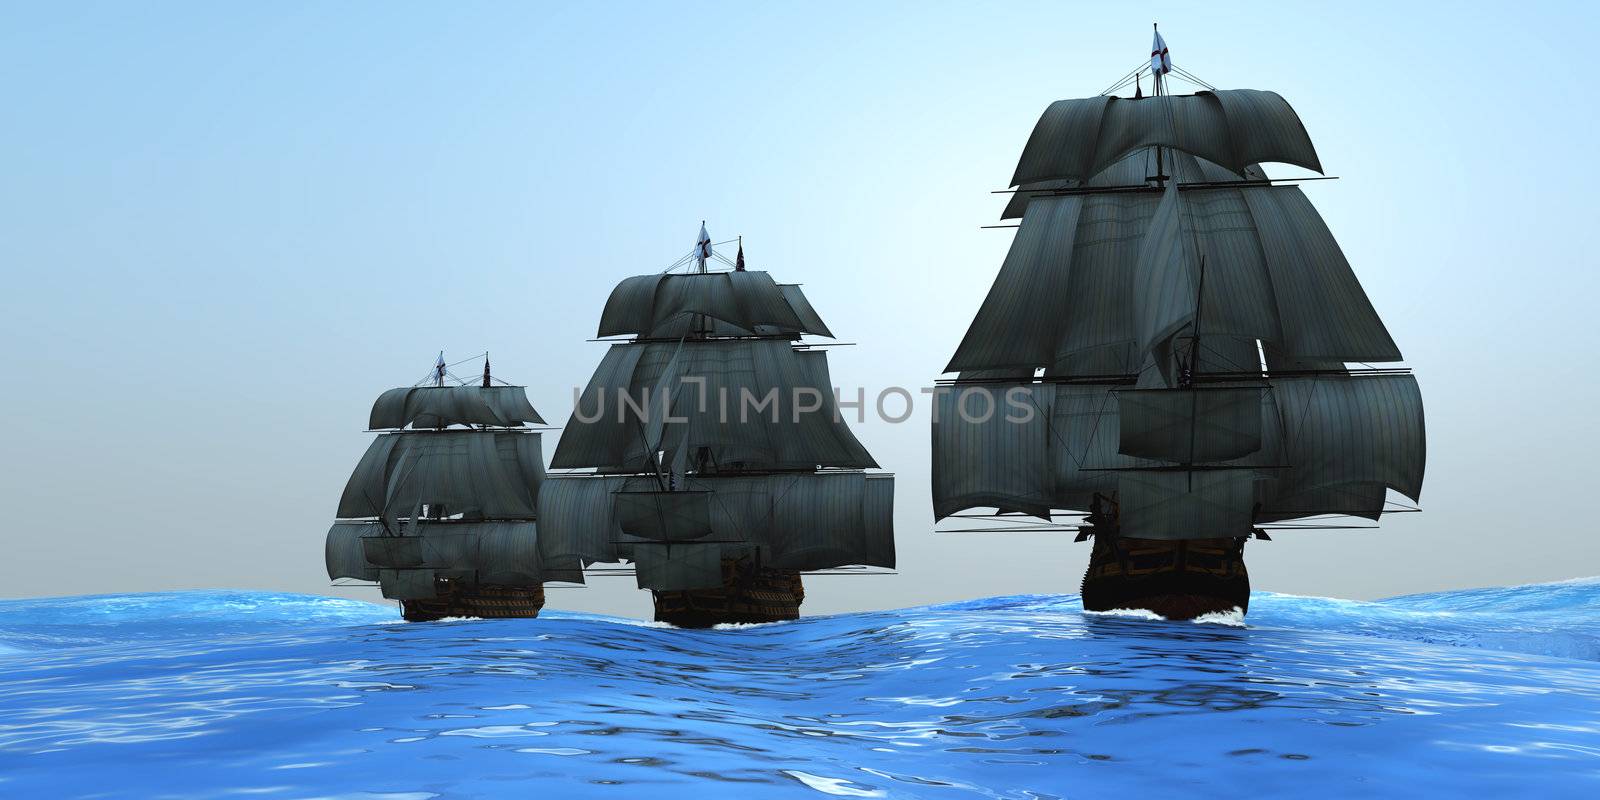 Three tall ships in full sail cross a large ocean with glistening blue waters.